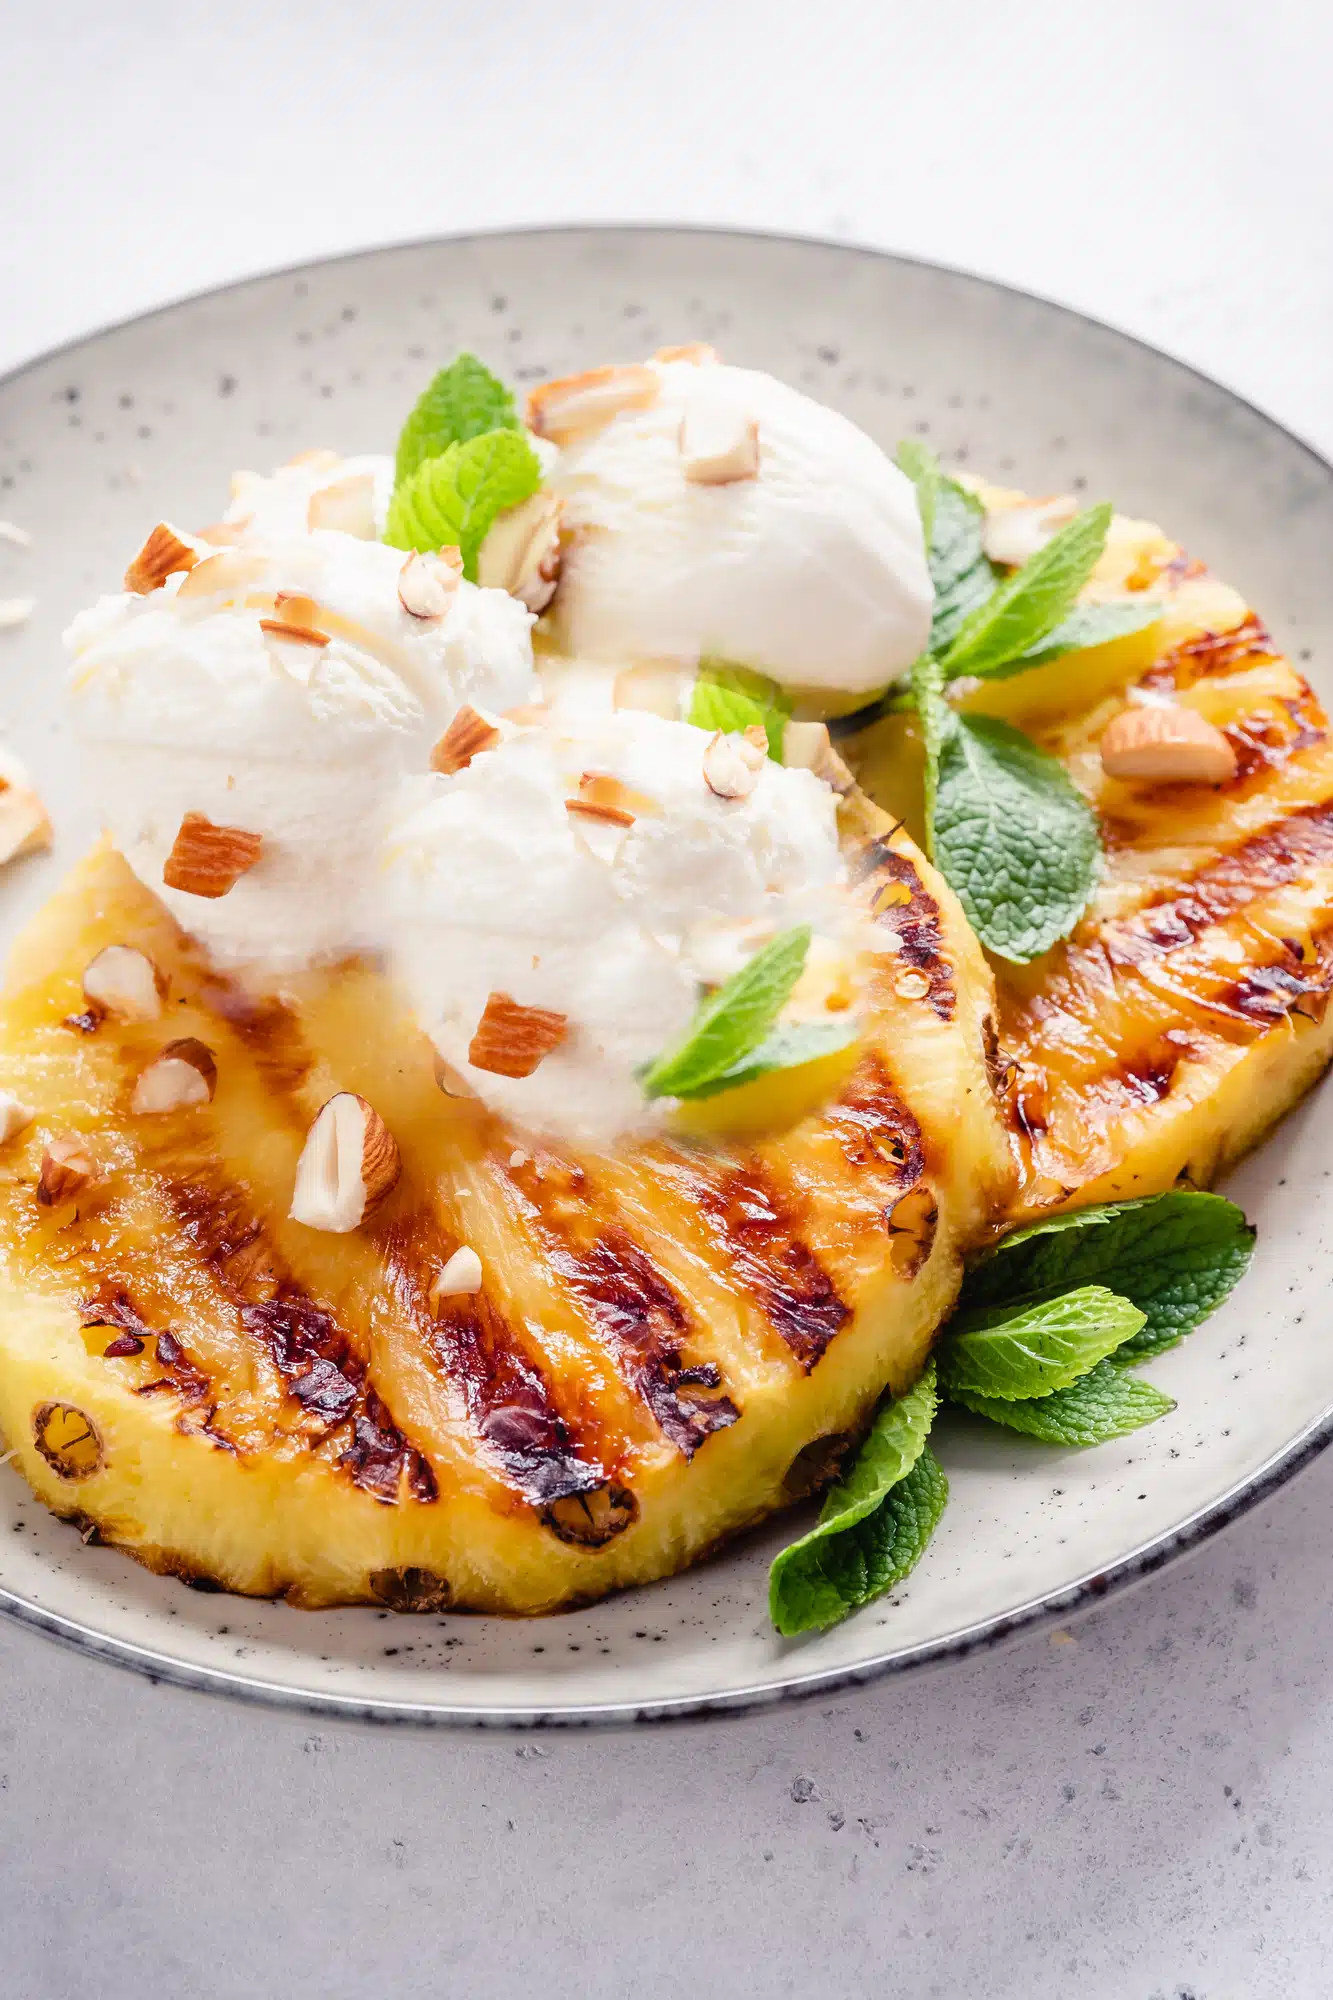 pineapple with scoops of ice cream